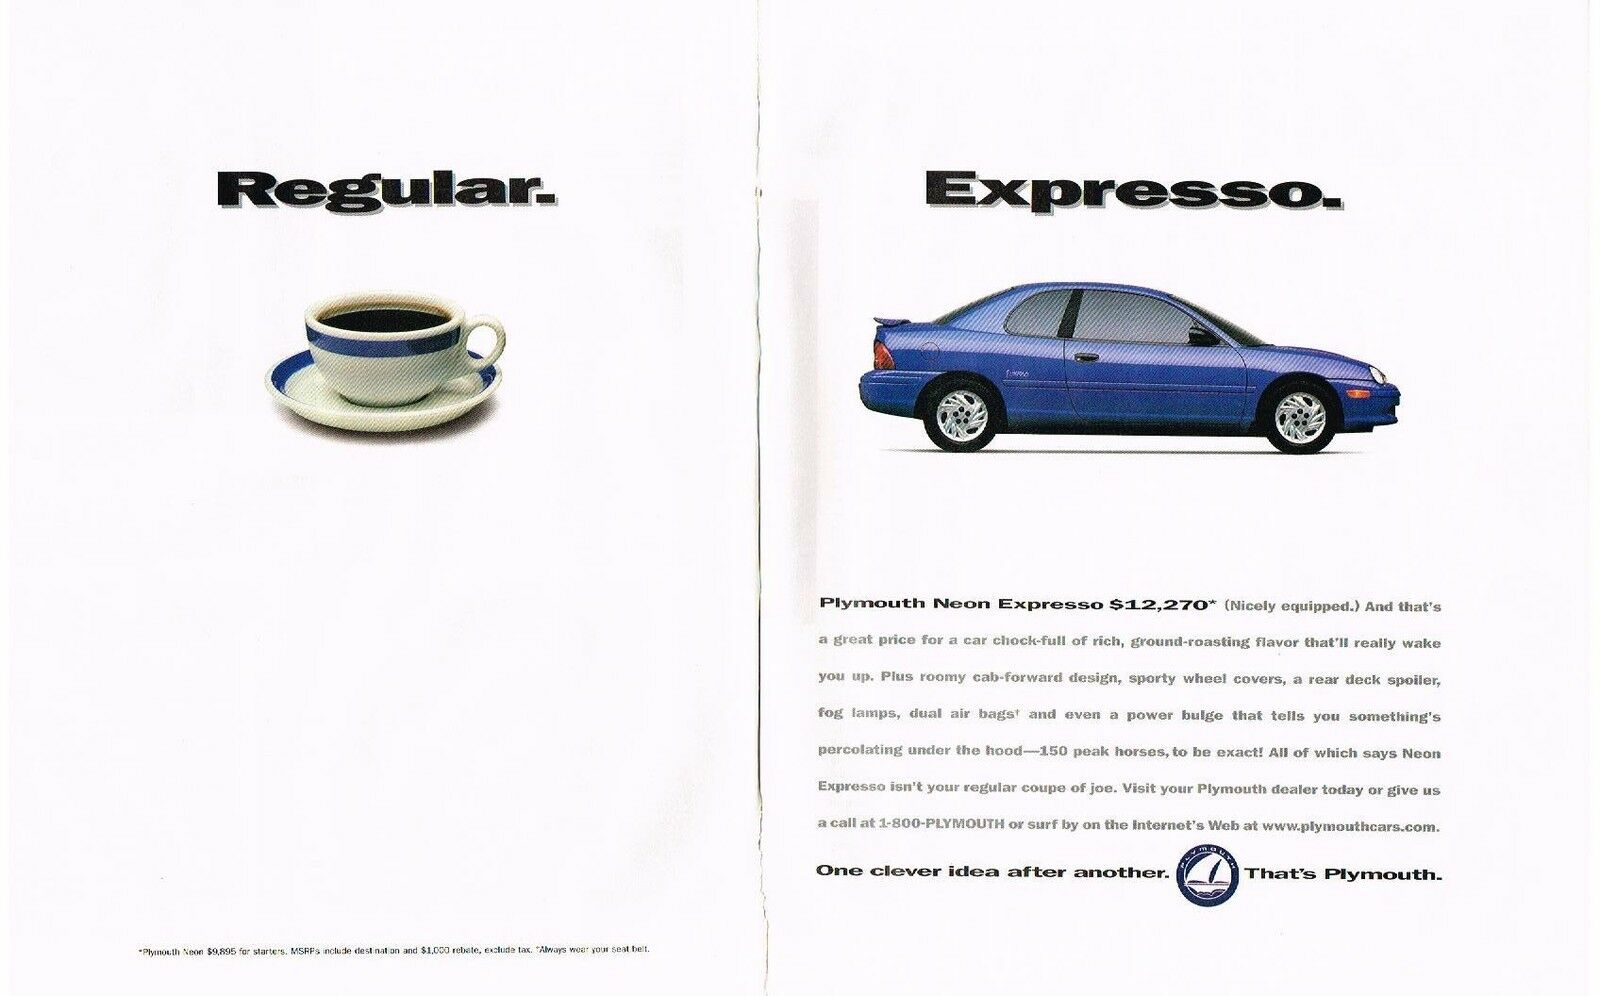 1996 USA PLYMOUTH NEON EXPRESSO